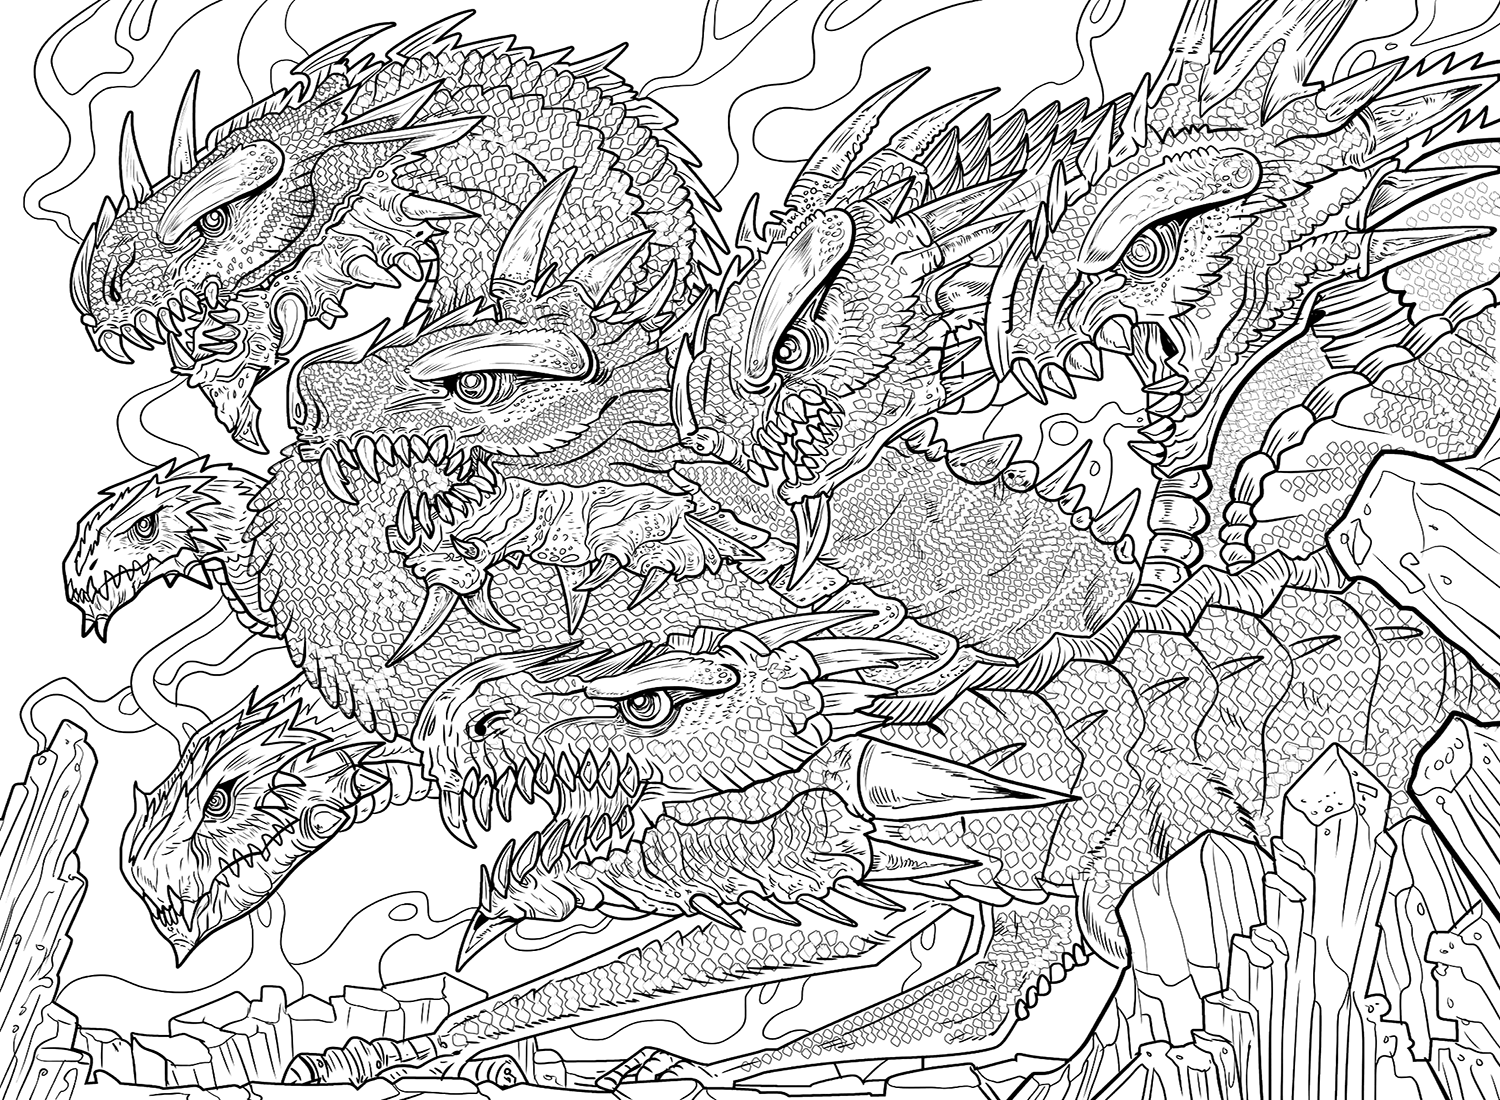 Hydra Coloring Page For Adults